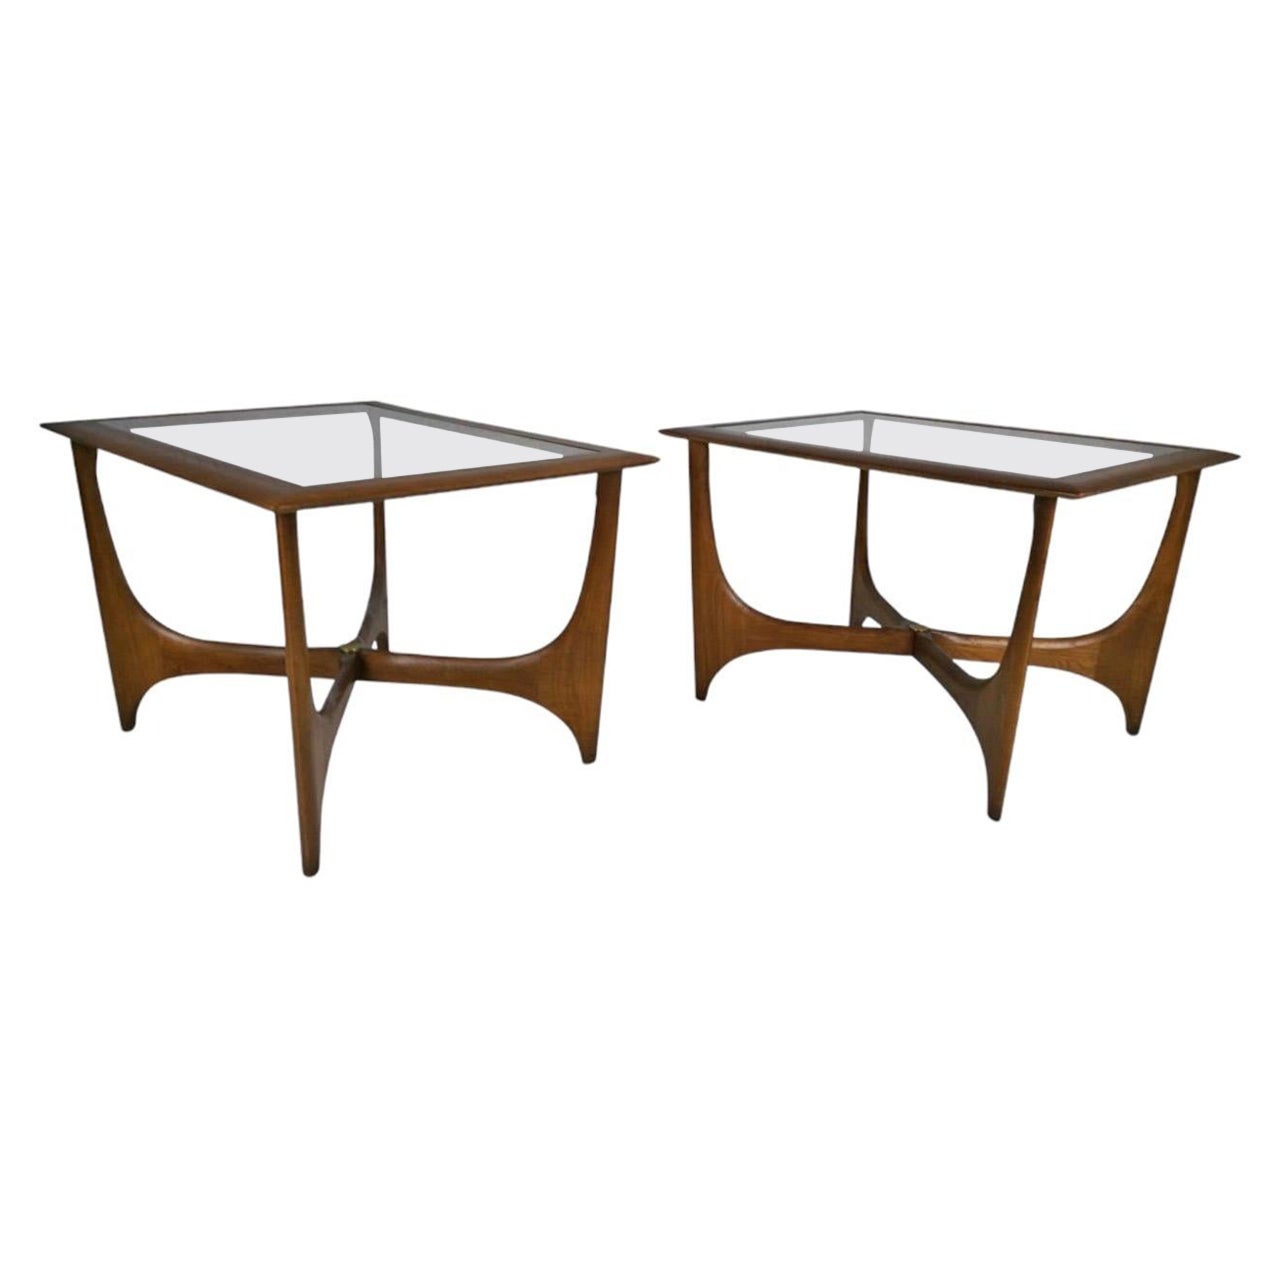 Vintage Mid-Century Modern Walnut and Glass End Tables by Lane, Set of 2